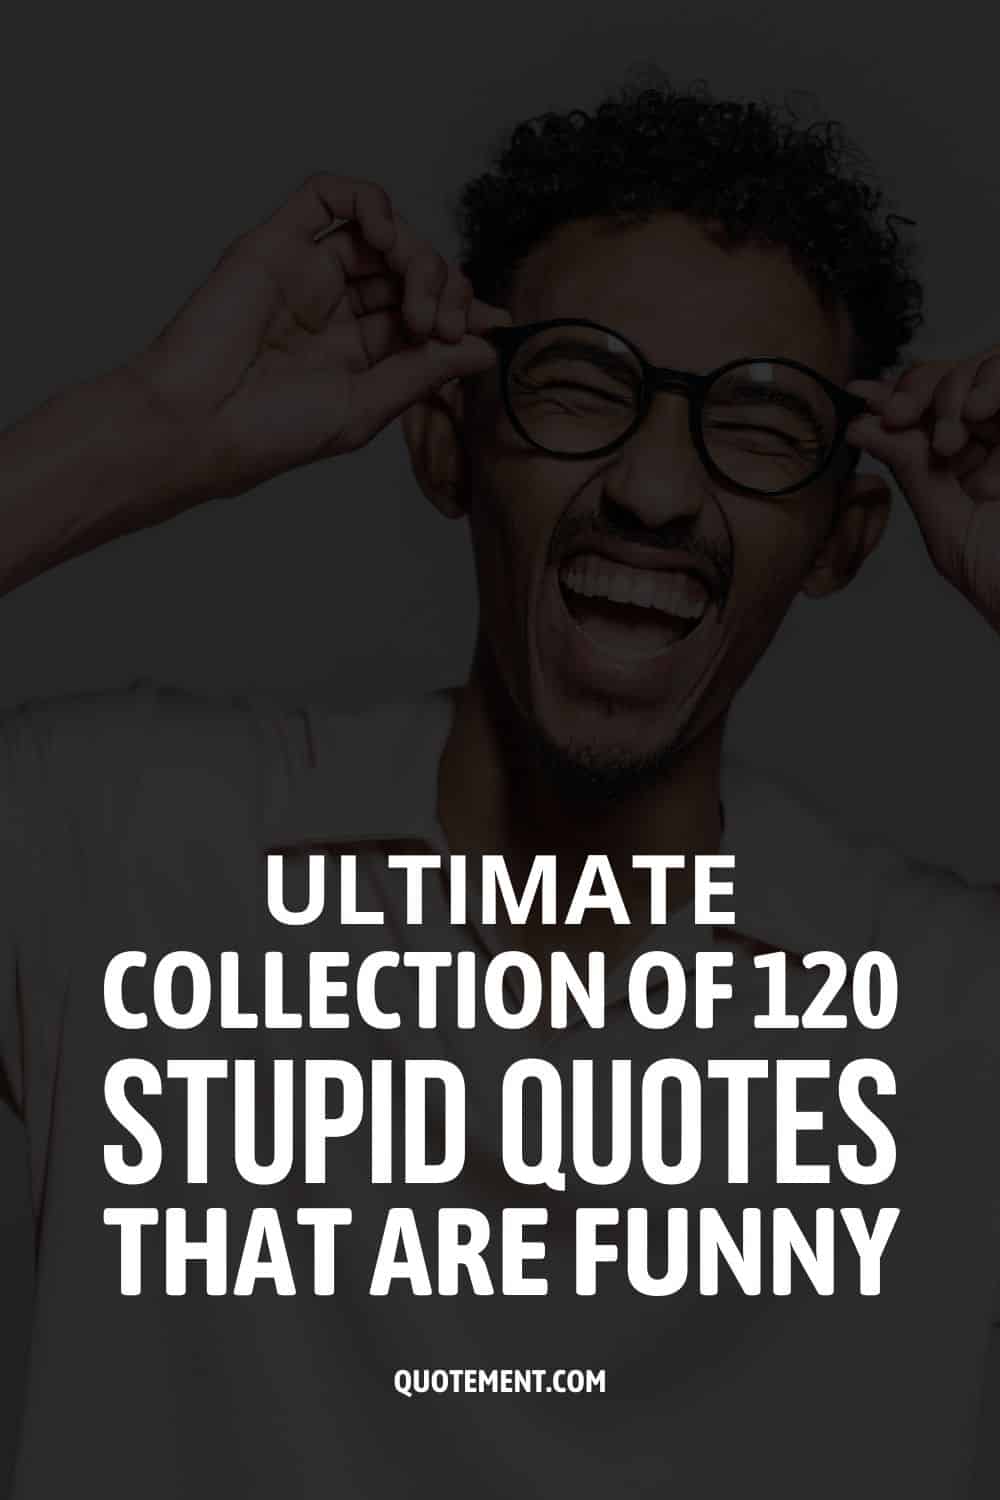 Ultimate Collection Of 120 Stupid Quotes That Are Funny 